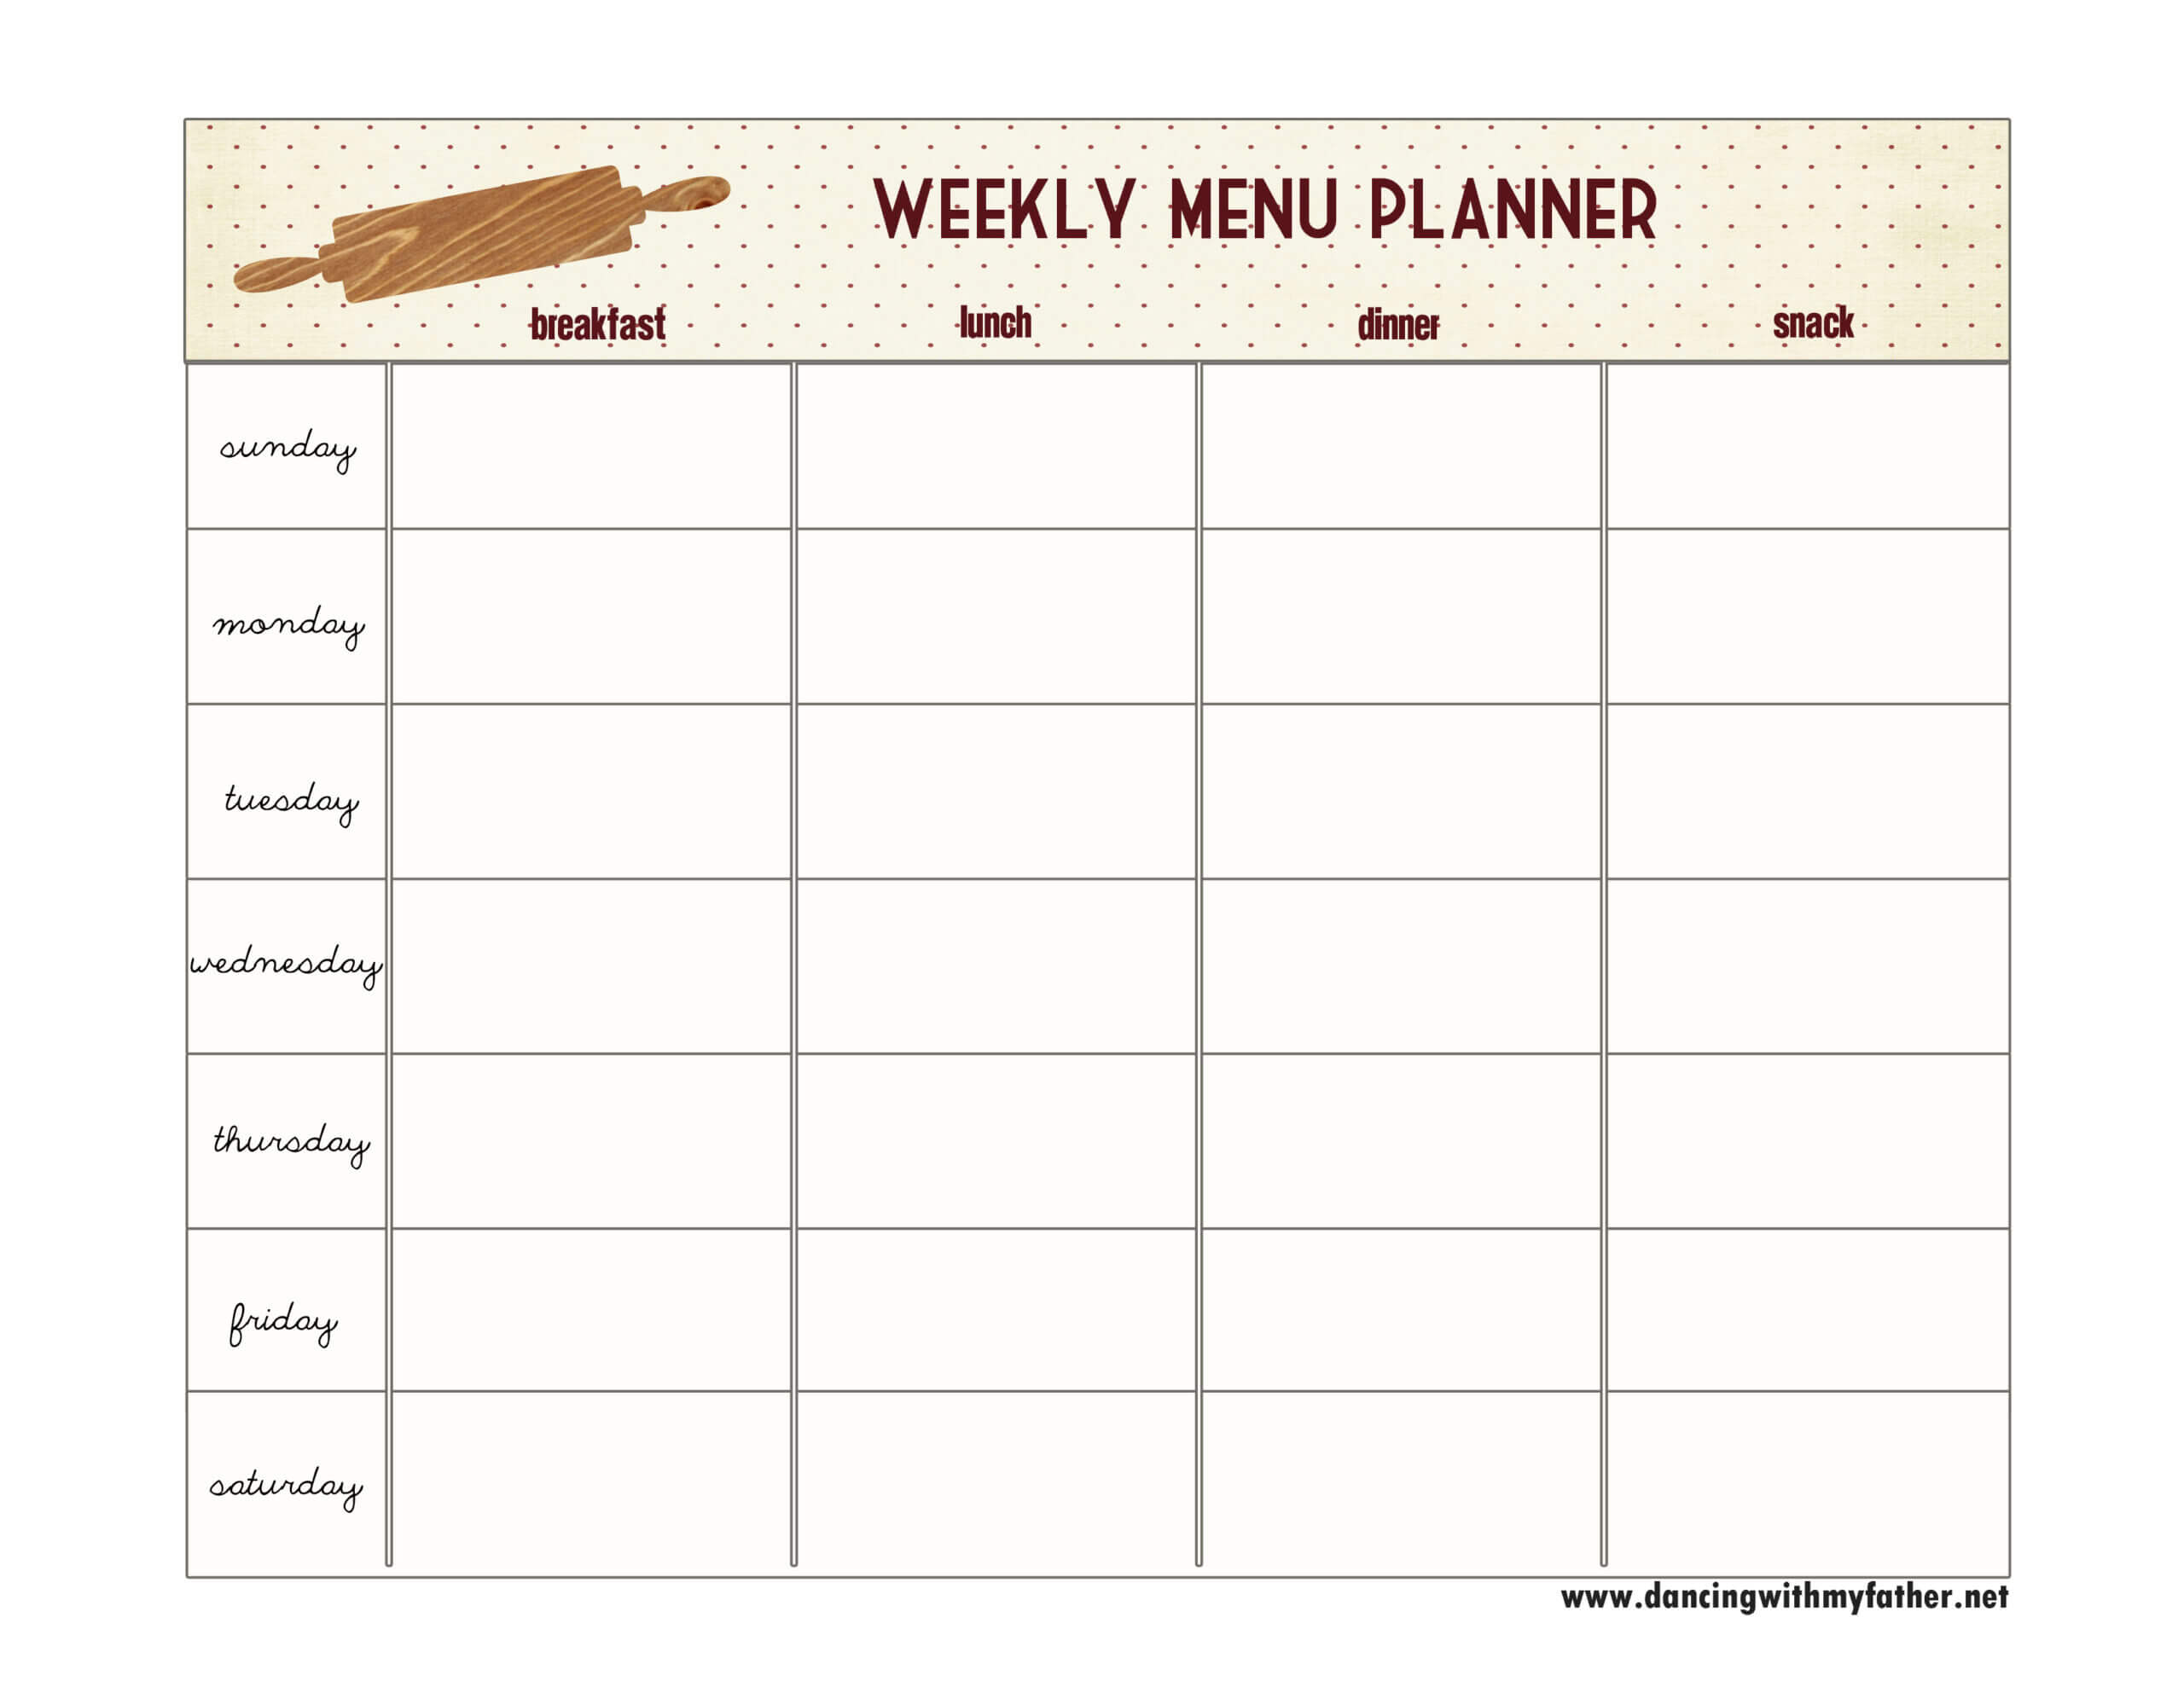 Blank Menu Planner Template ] – 28 Useful Printable Monthly Within Child Care Menu Templates Free